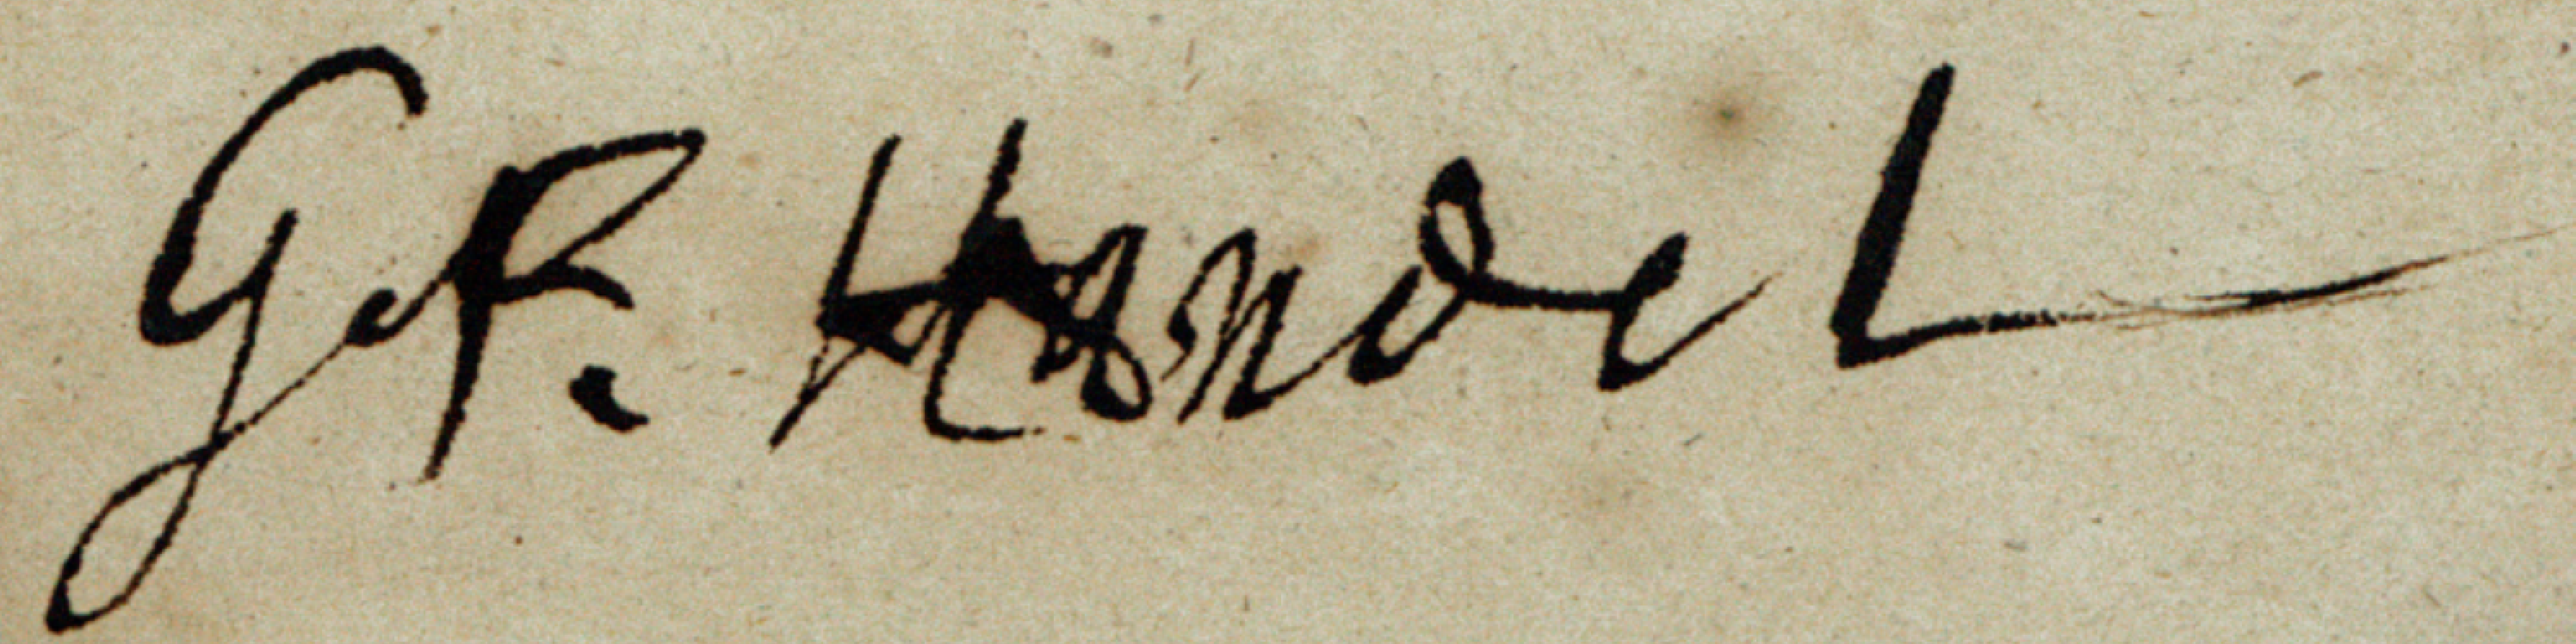 Handel's signature from a receipt for large kettle drums lent to him in 1739.